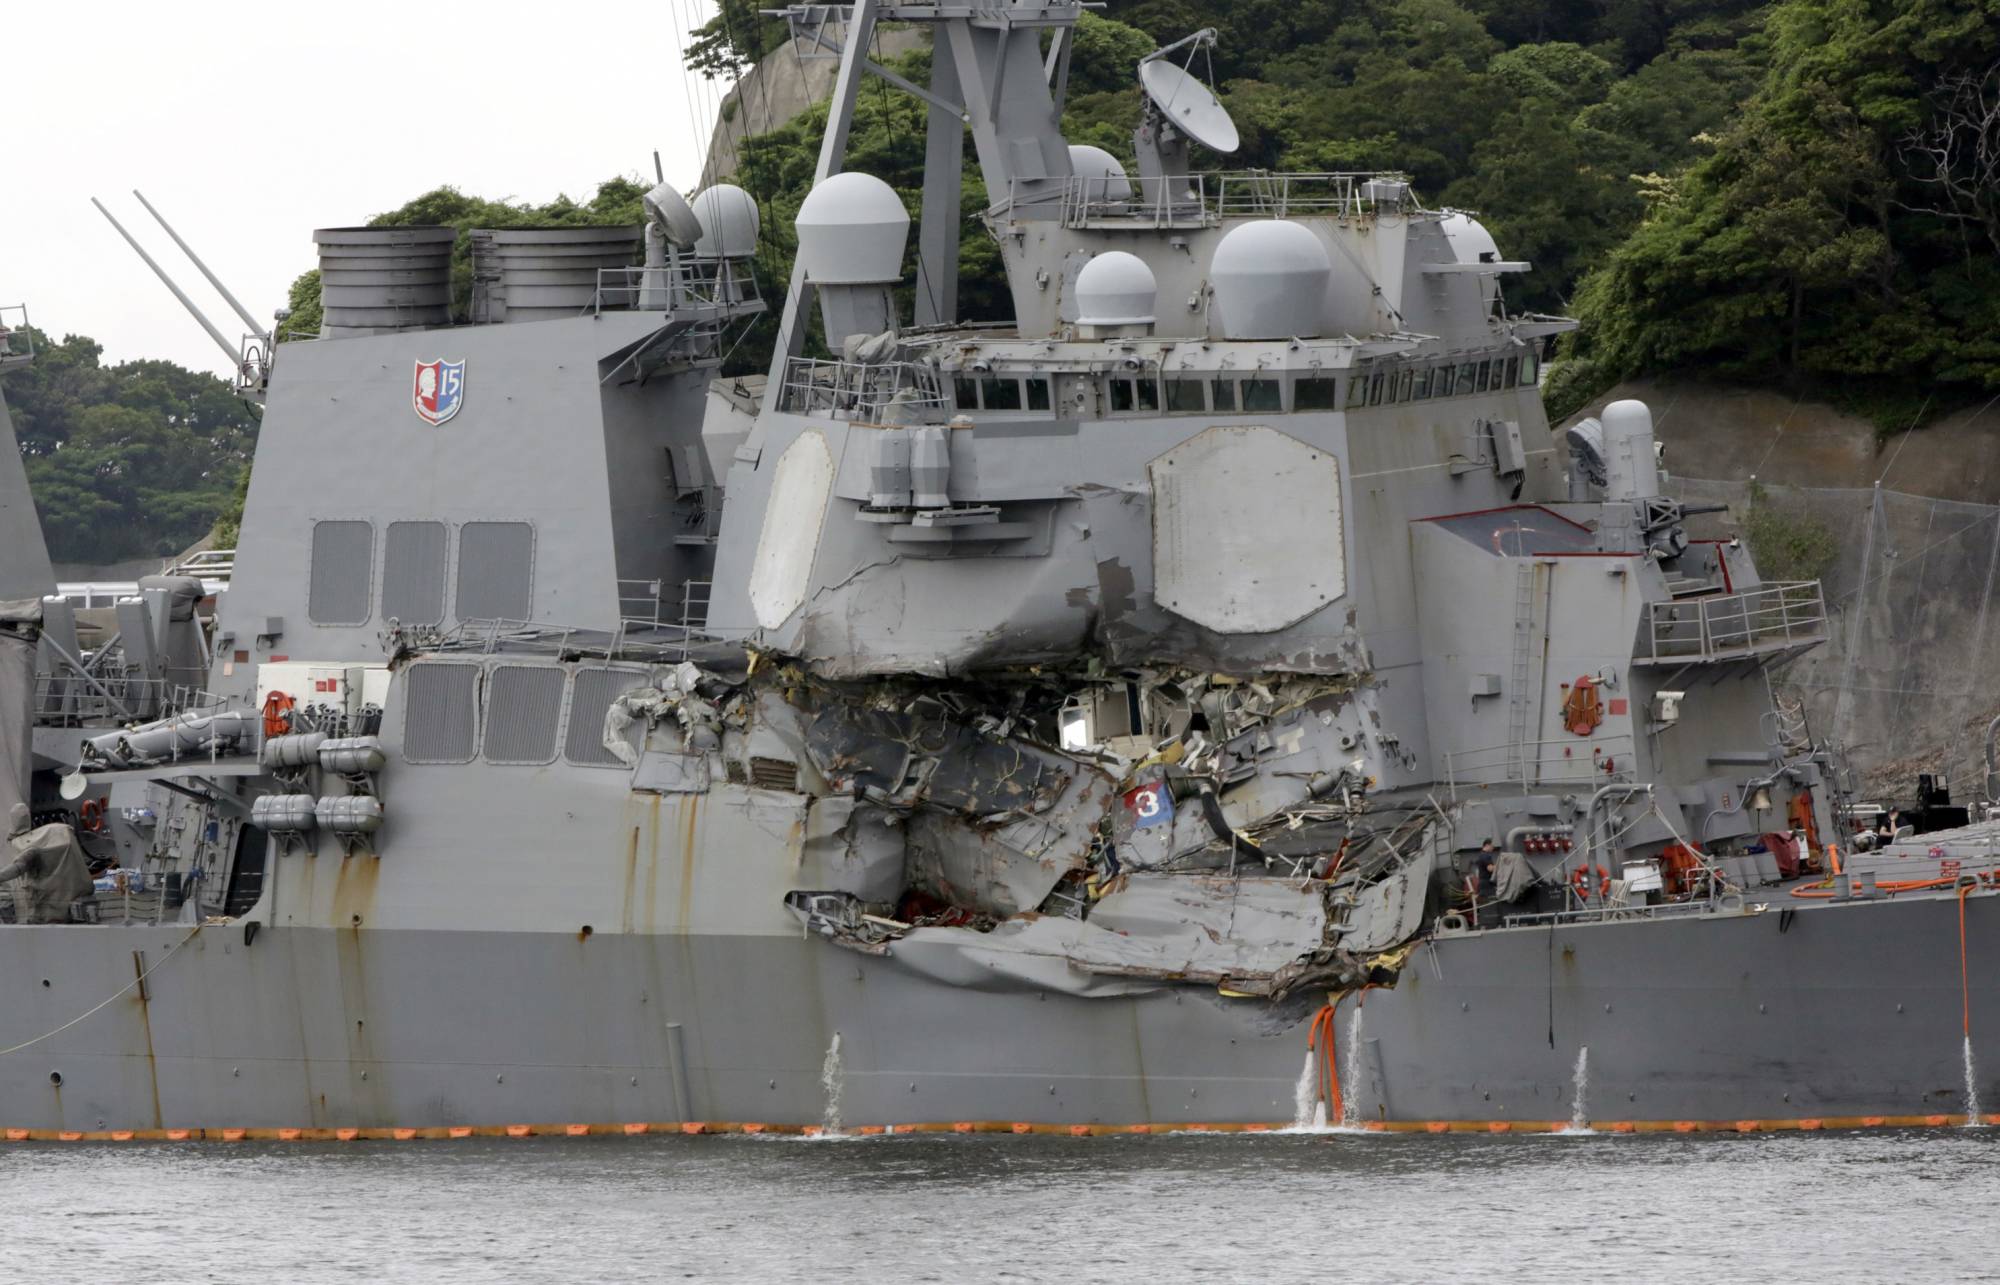 FILE - In this June 18, 2017, file photo, the damaged USS Fitzgerald is docked at the U.S. Naval base in Yokosuka, southwest of Tokyo, after colliding with Philippine-flagged container ship ACX Crystal off Japan.  On June 17, 2017, seven sailors died after a container ship collided with the USS Fitzgerald guided-missile destroyer off Japan. (AP Photo/Eugene Hoshiko, File)